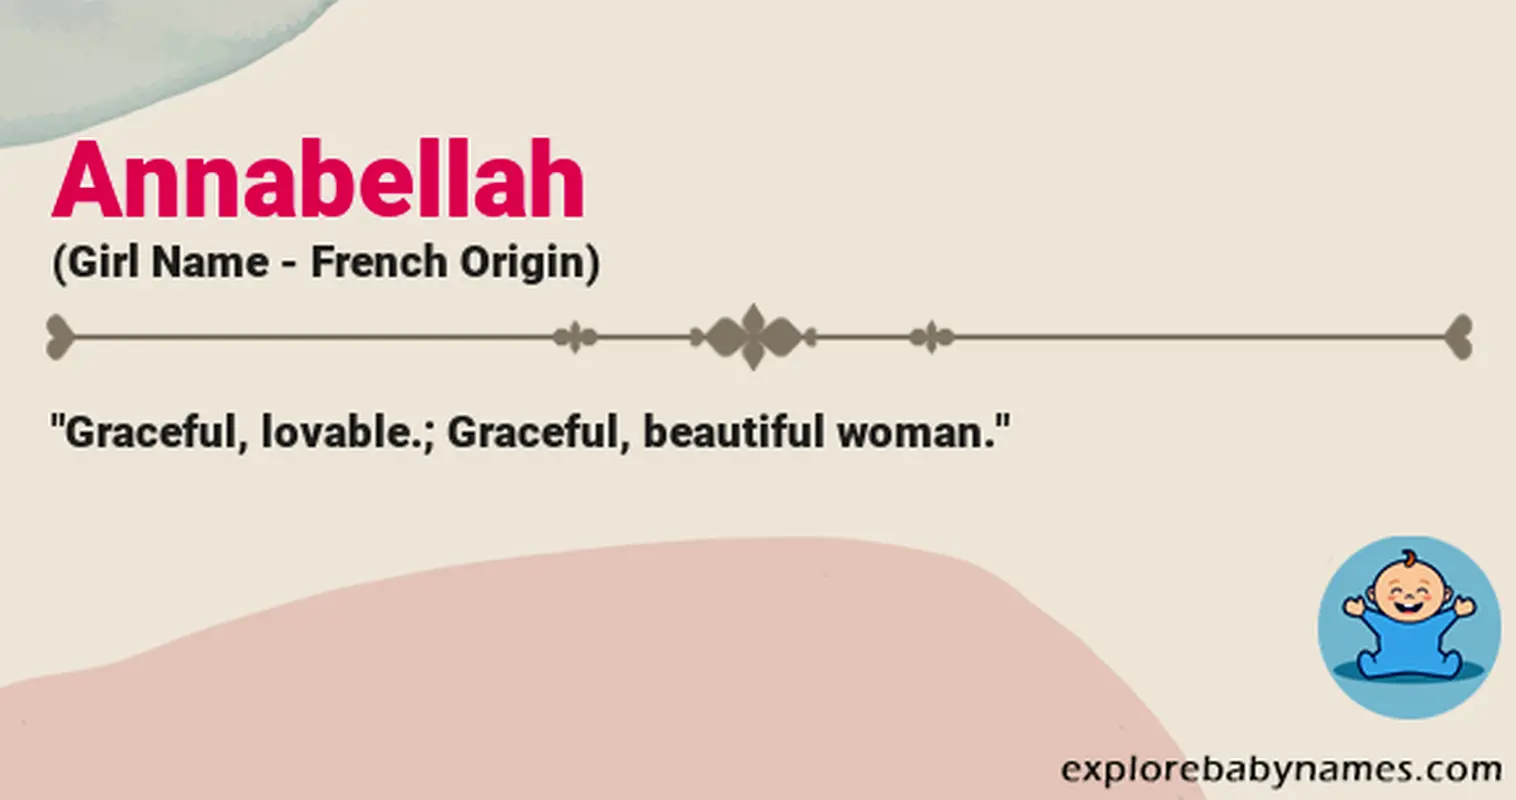 Meaning of Annabellah